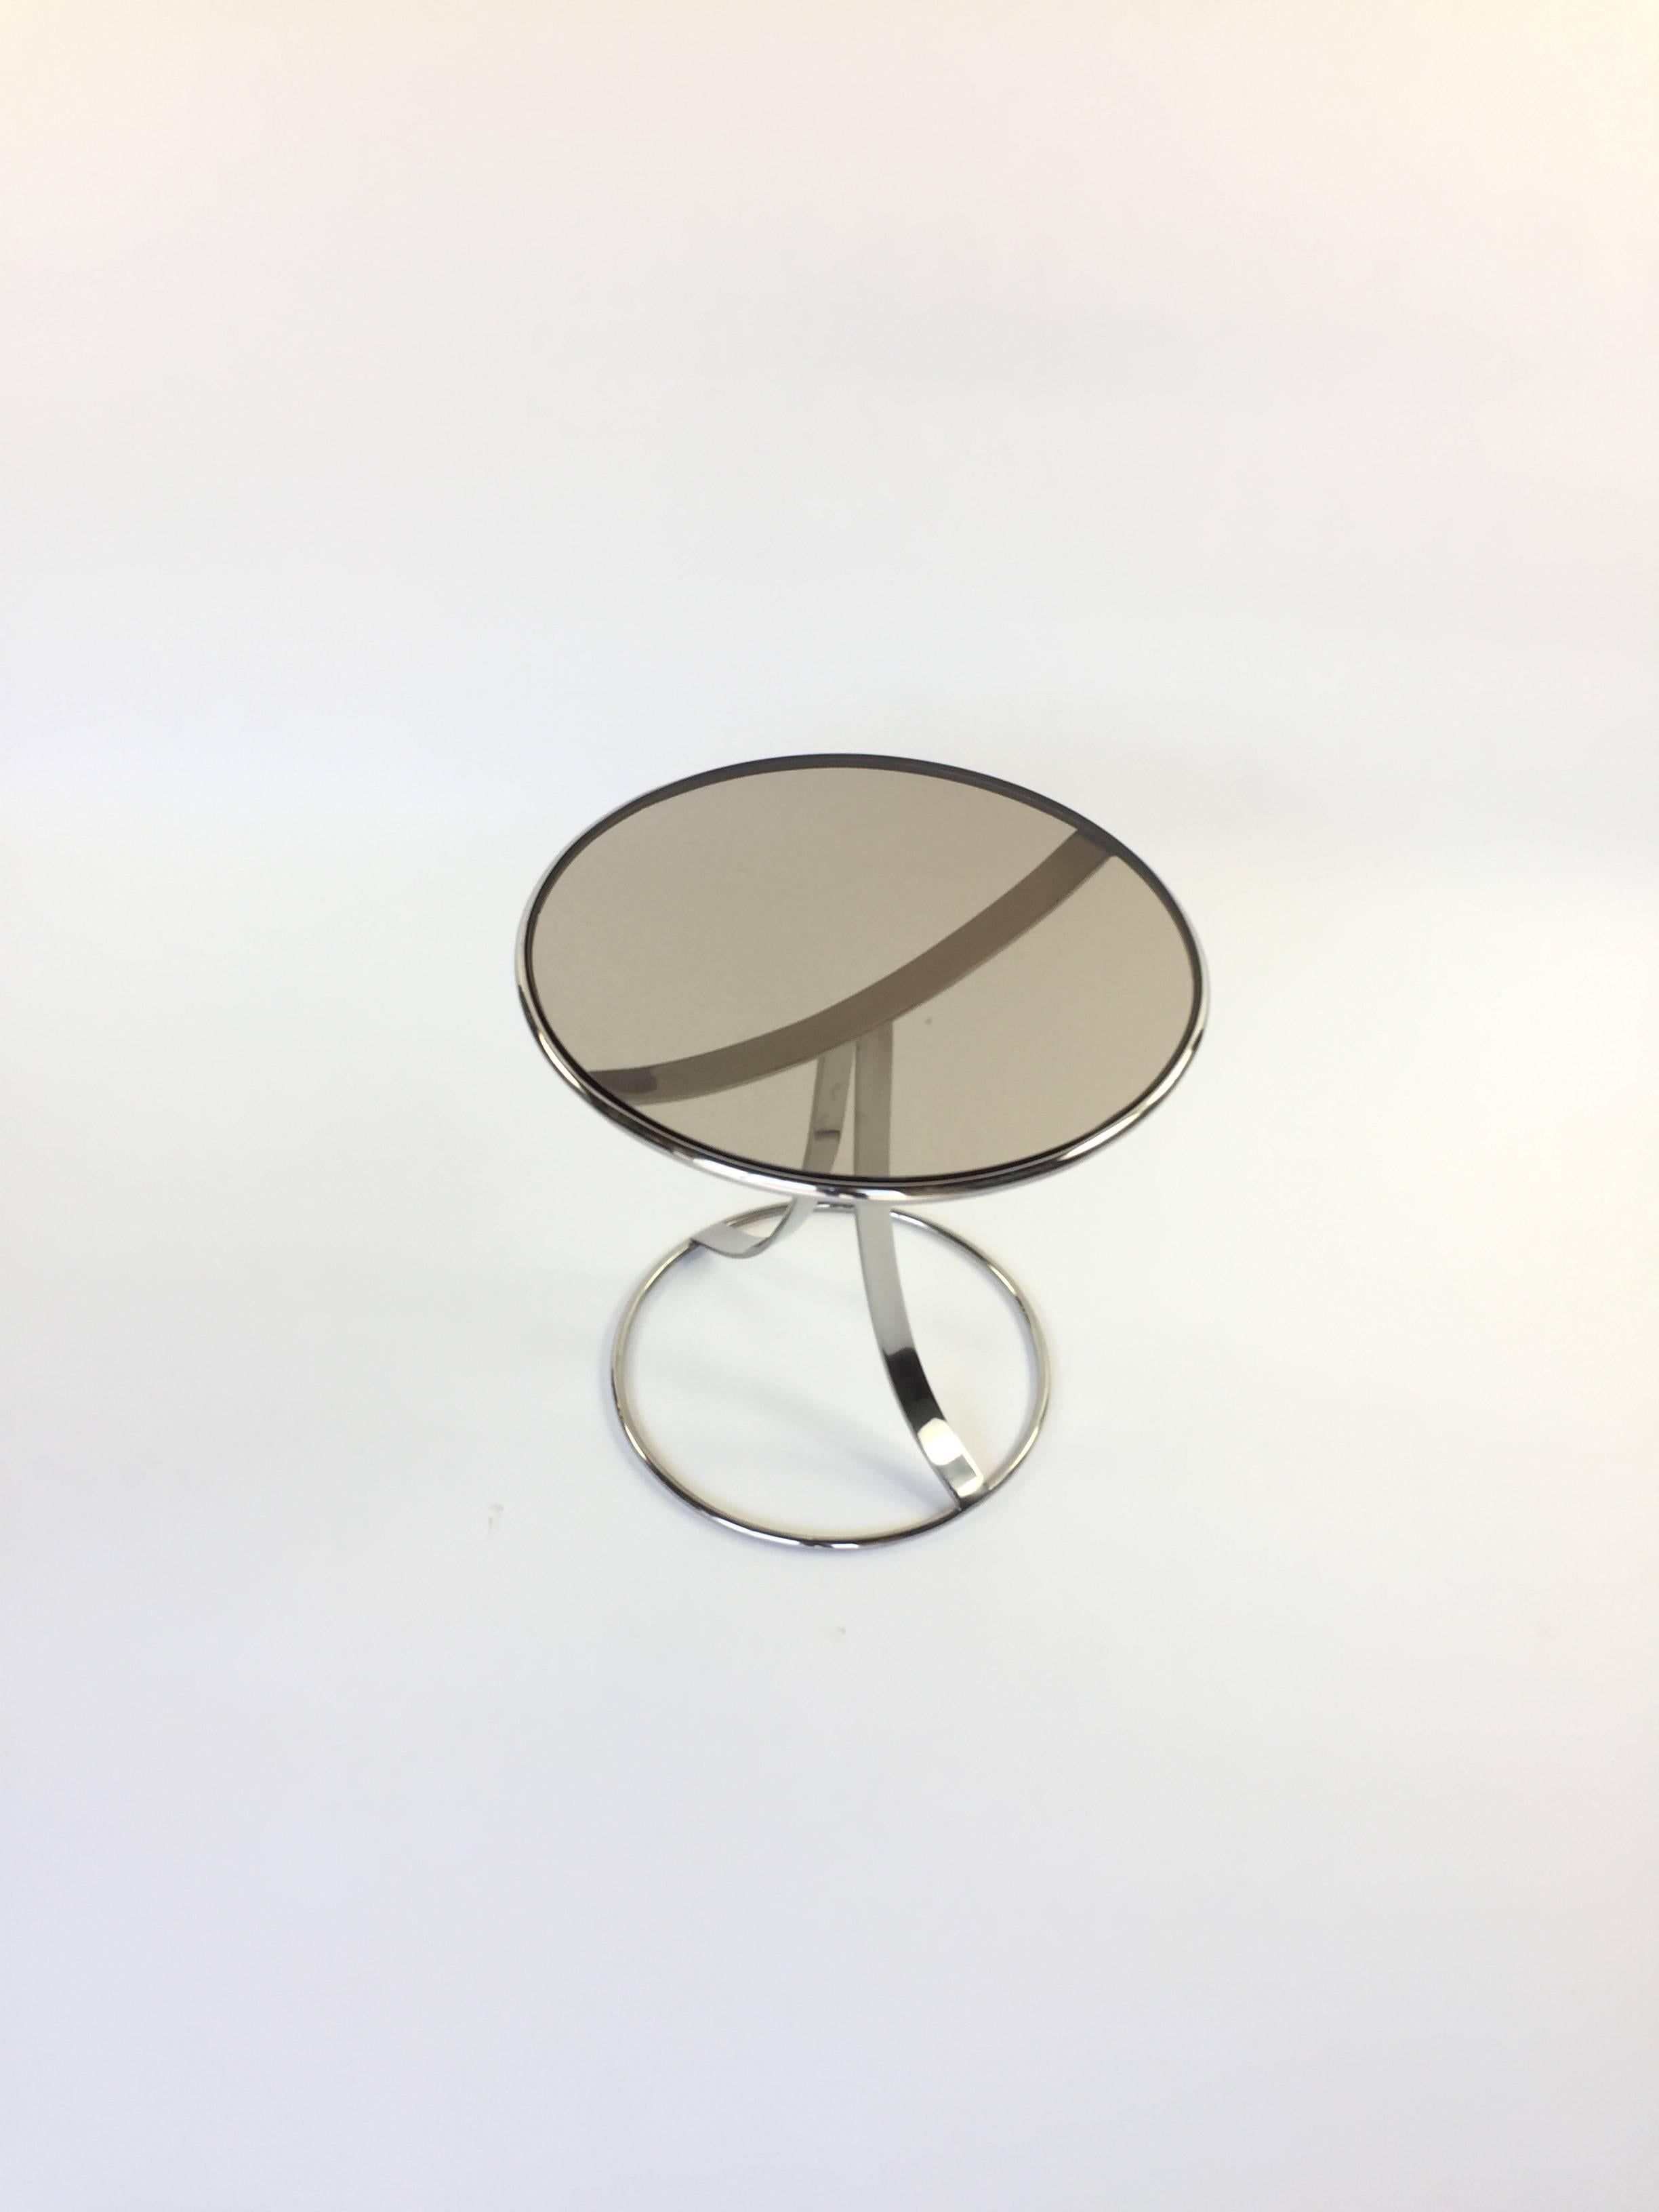 Gardner Leaver for steelcase ens table. Smoked glass top with polished stainless base.